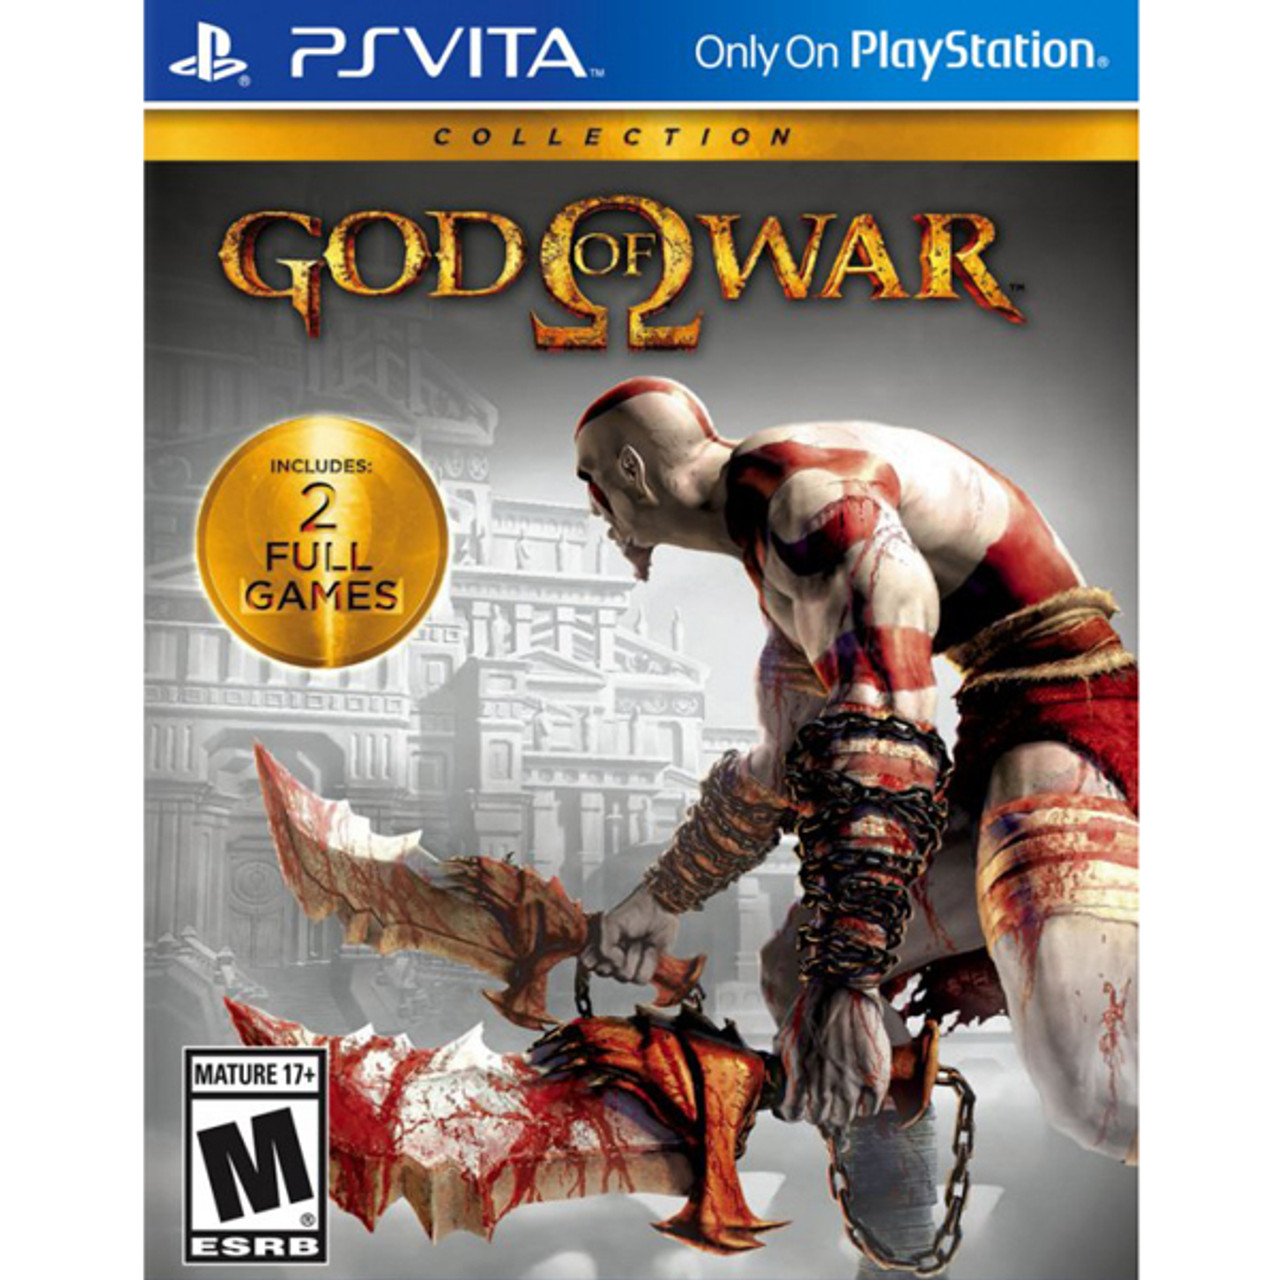 Novos JOGOS PS PLUS EXTRA DELUXE! God Of War CLASSIC Collection CADÊ?! 